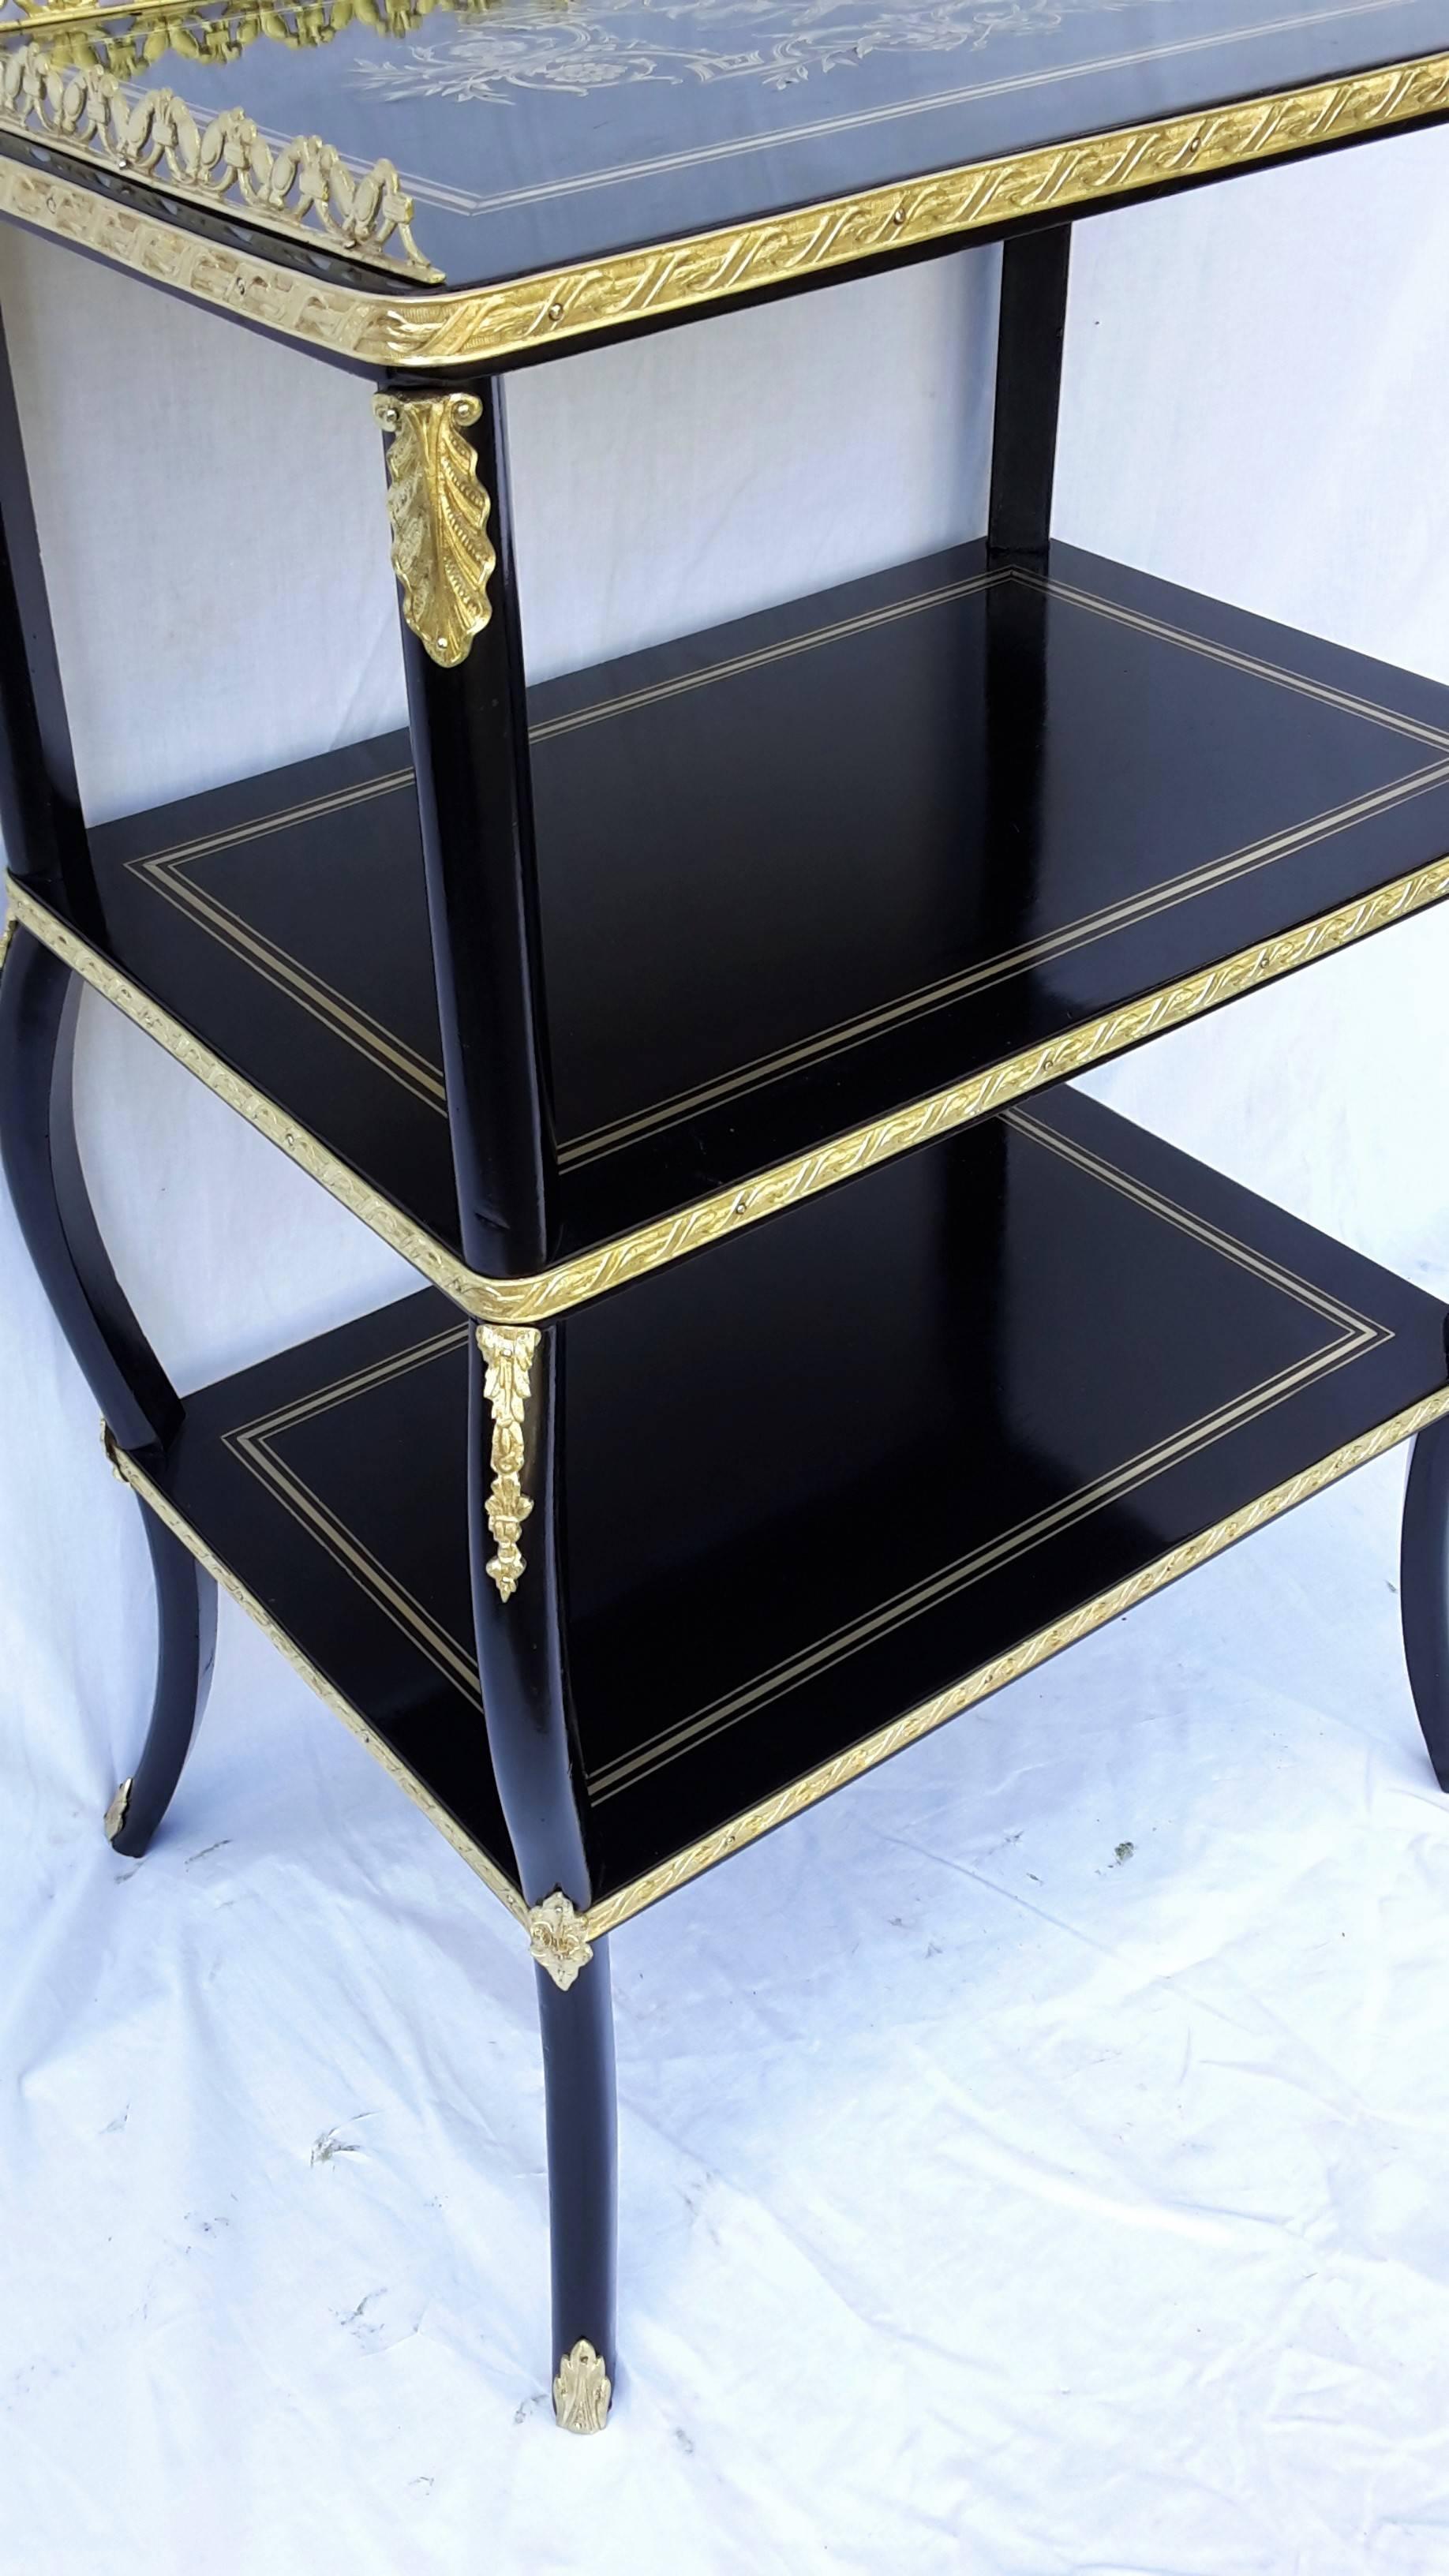 Charming 19th century French, Napoleon 3 style side table with three floors, decorated in Boulle Marquetry style with brass filets and a beautiful ornamentations at the corners. Many decorations in gilt bronze in all
facades.
Napoleon 3 style,